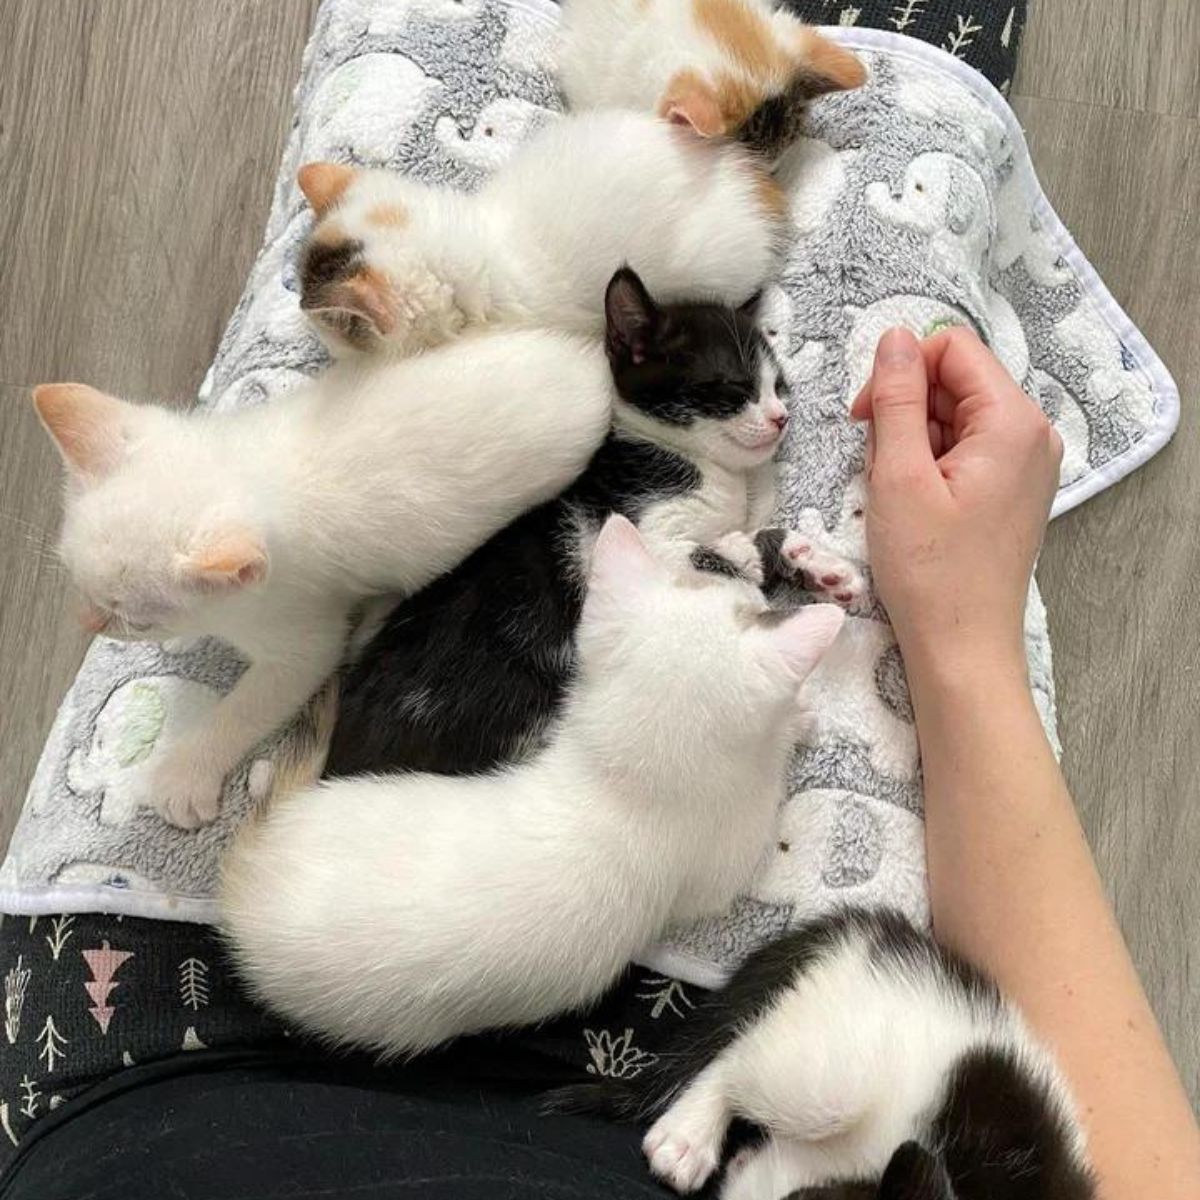 human helping with kittens